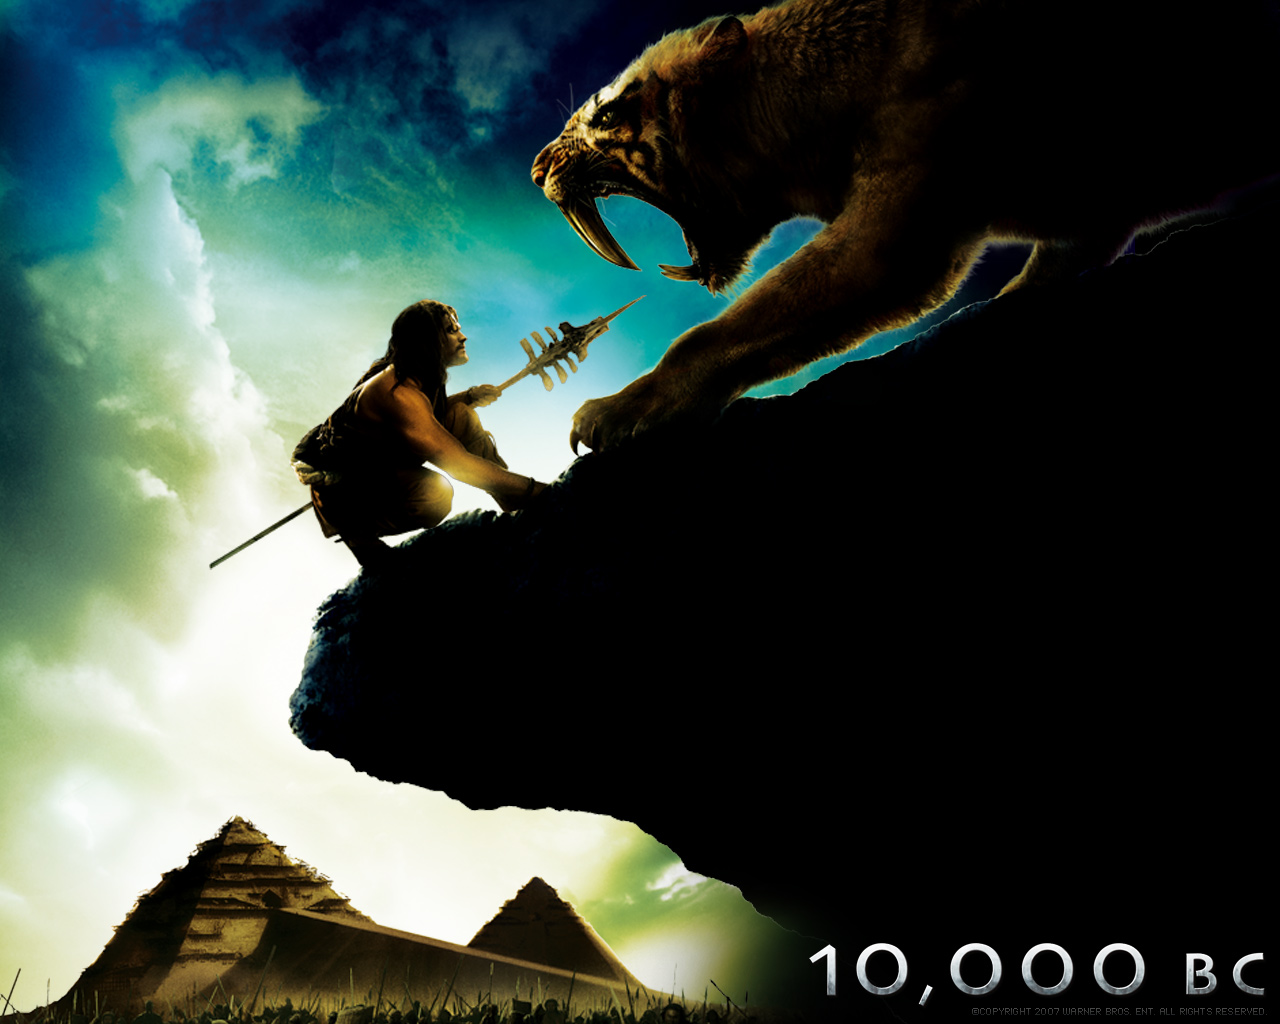 Download full size 10000 BC wallpaper / Movies / 1280x1024